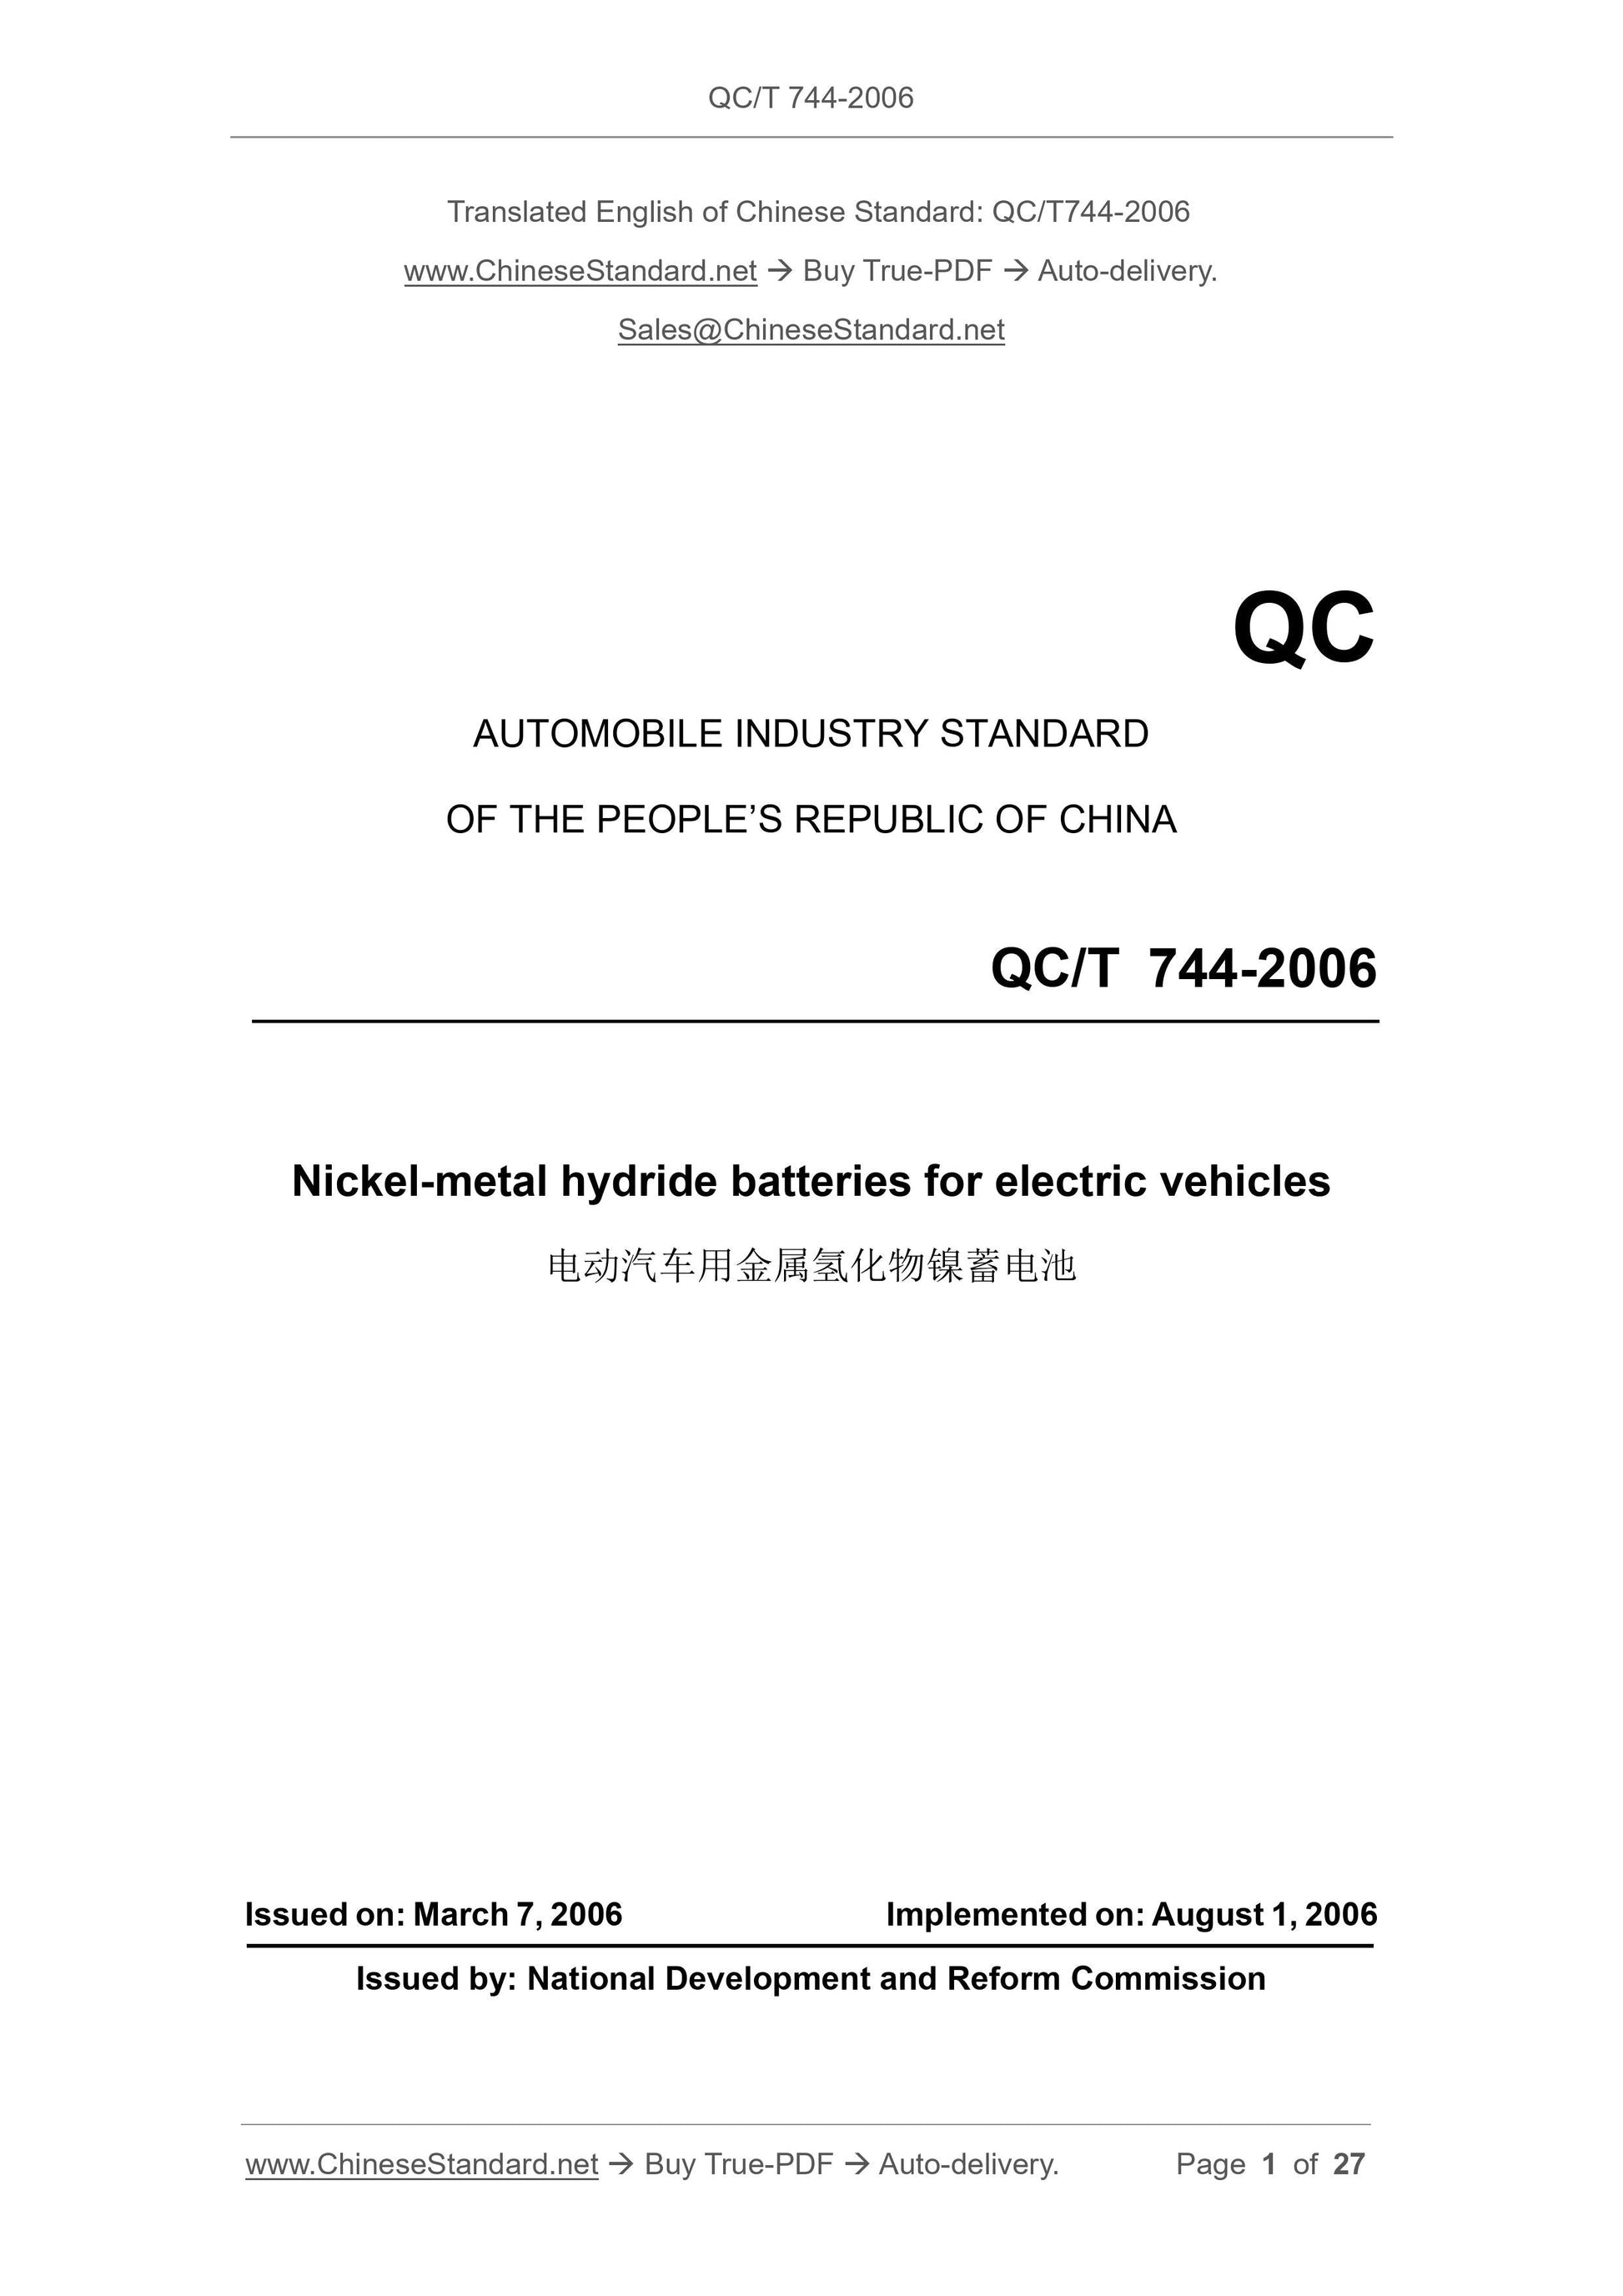 QC/T 744-2006 Page 1